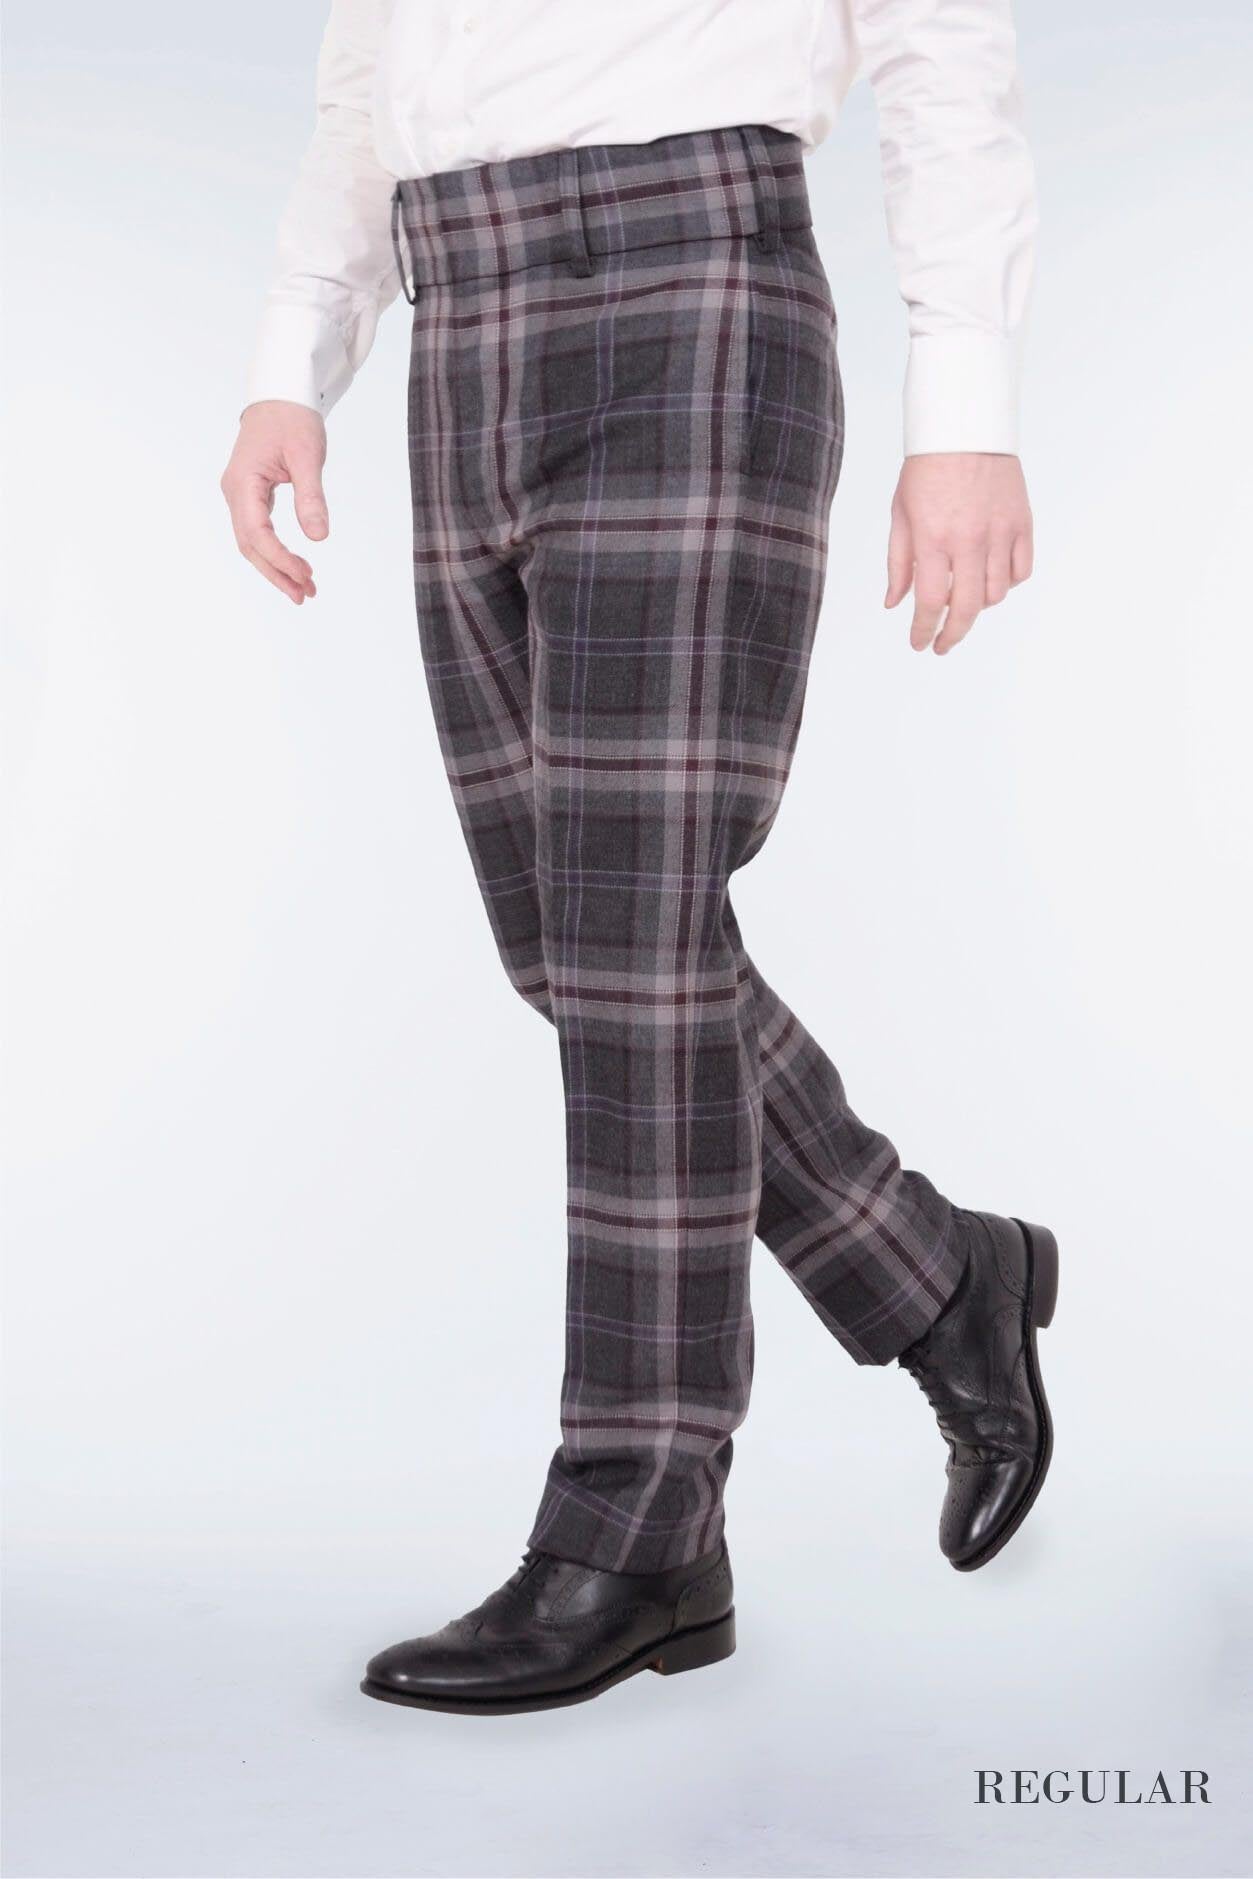 Grey Casual Trouser Plaid Pants Outfit Trends With Black Sweater Street Style  Mens Checked Trousers Outfit  Casual wear